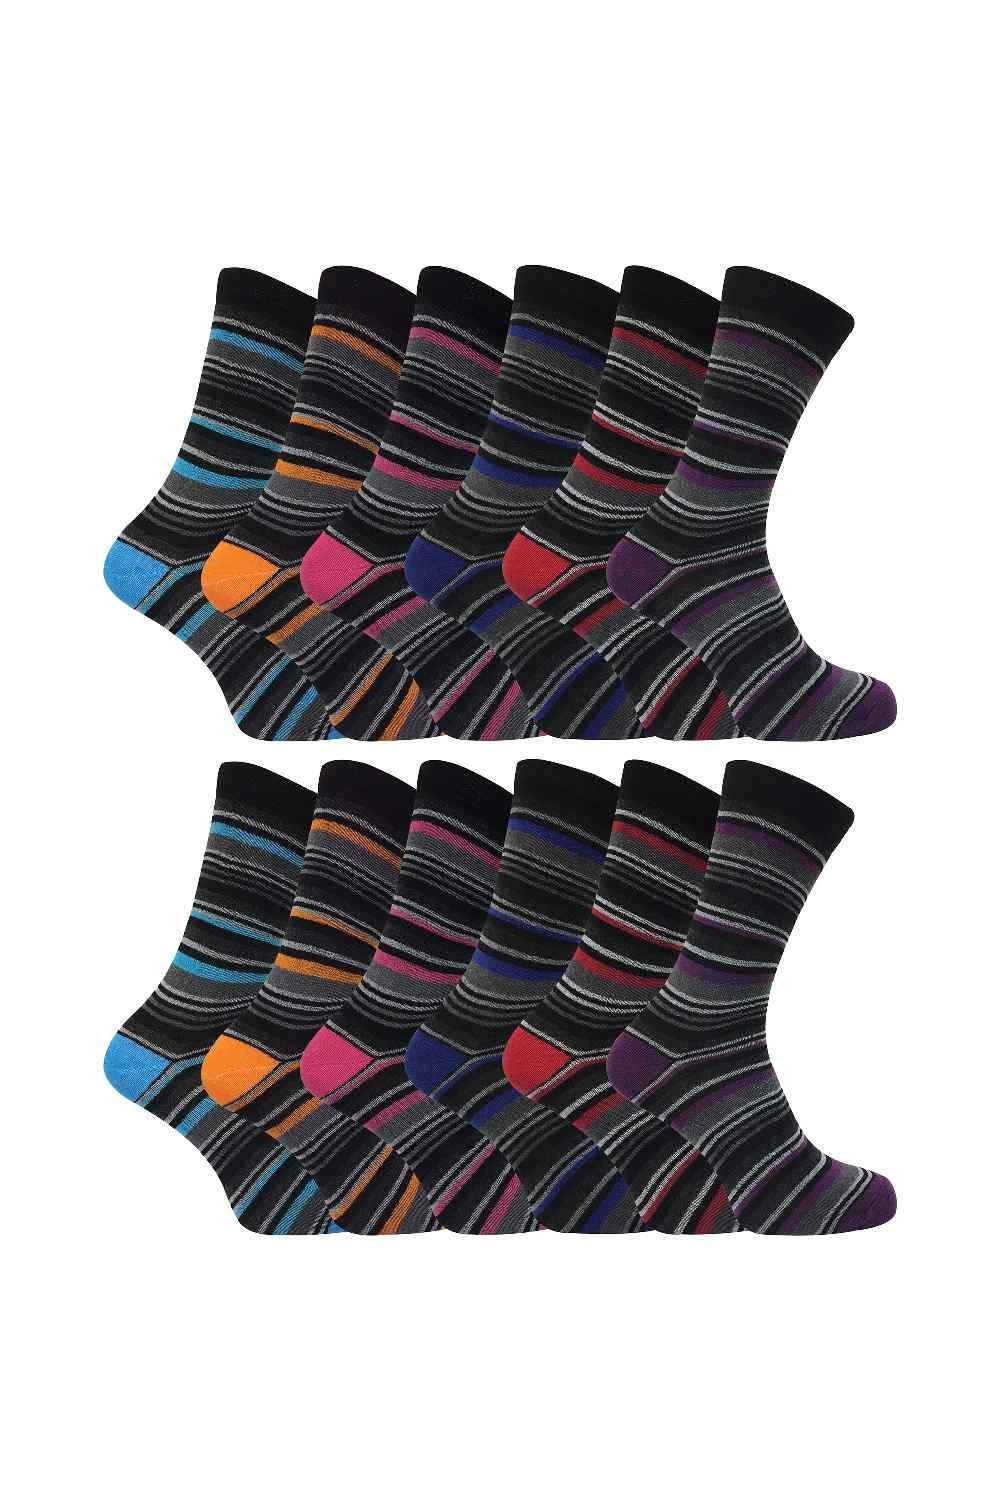 12 Pair Multipack Soft Breathable Cotton Striped Socks